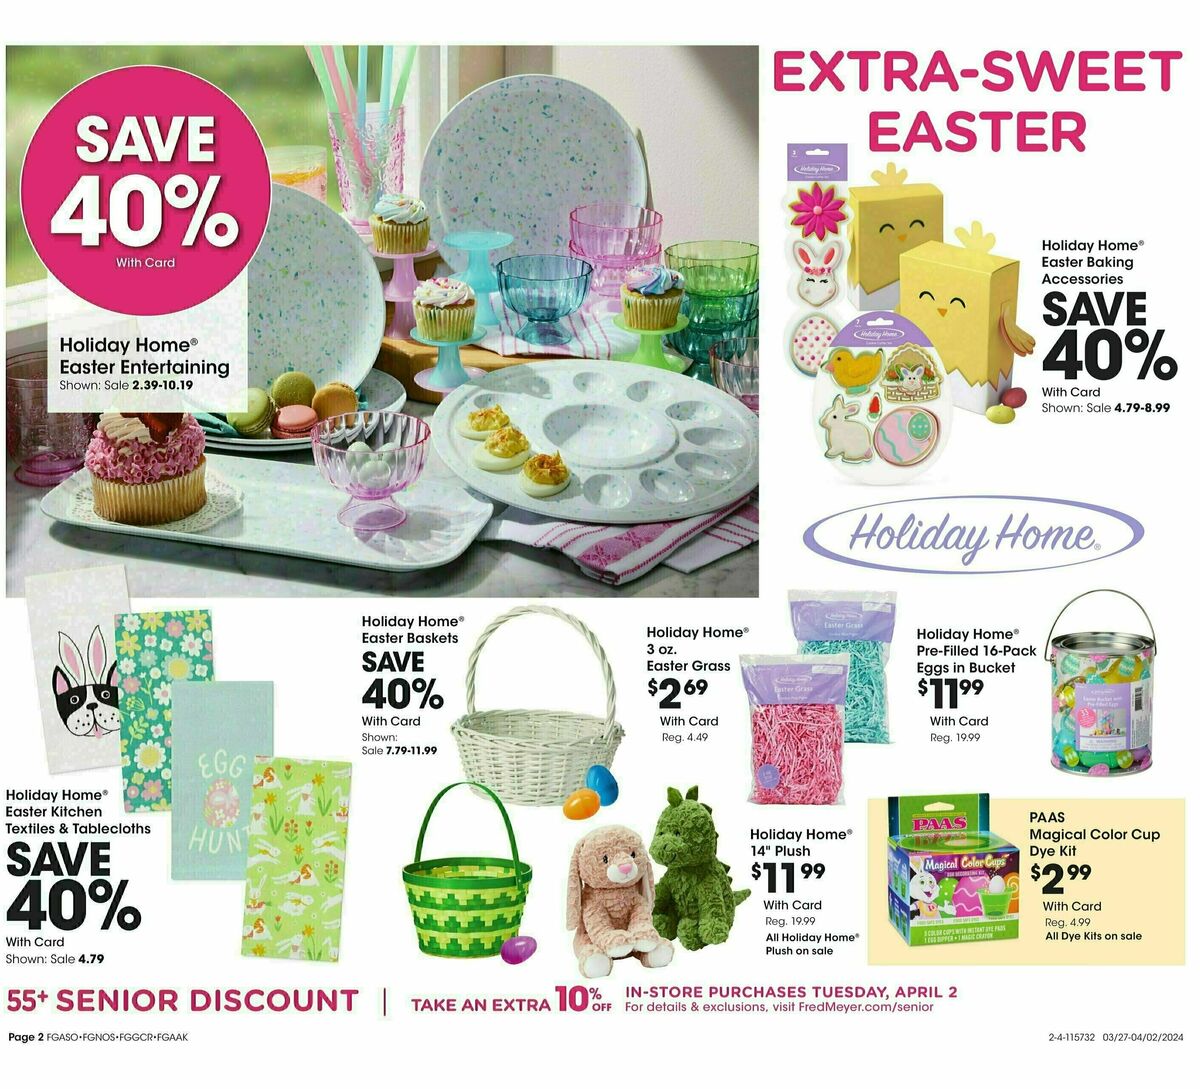 Fred Meyer General Merchandise Weekly Ad from March 27